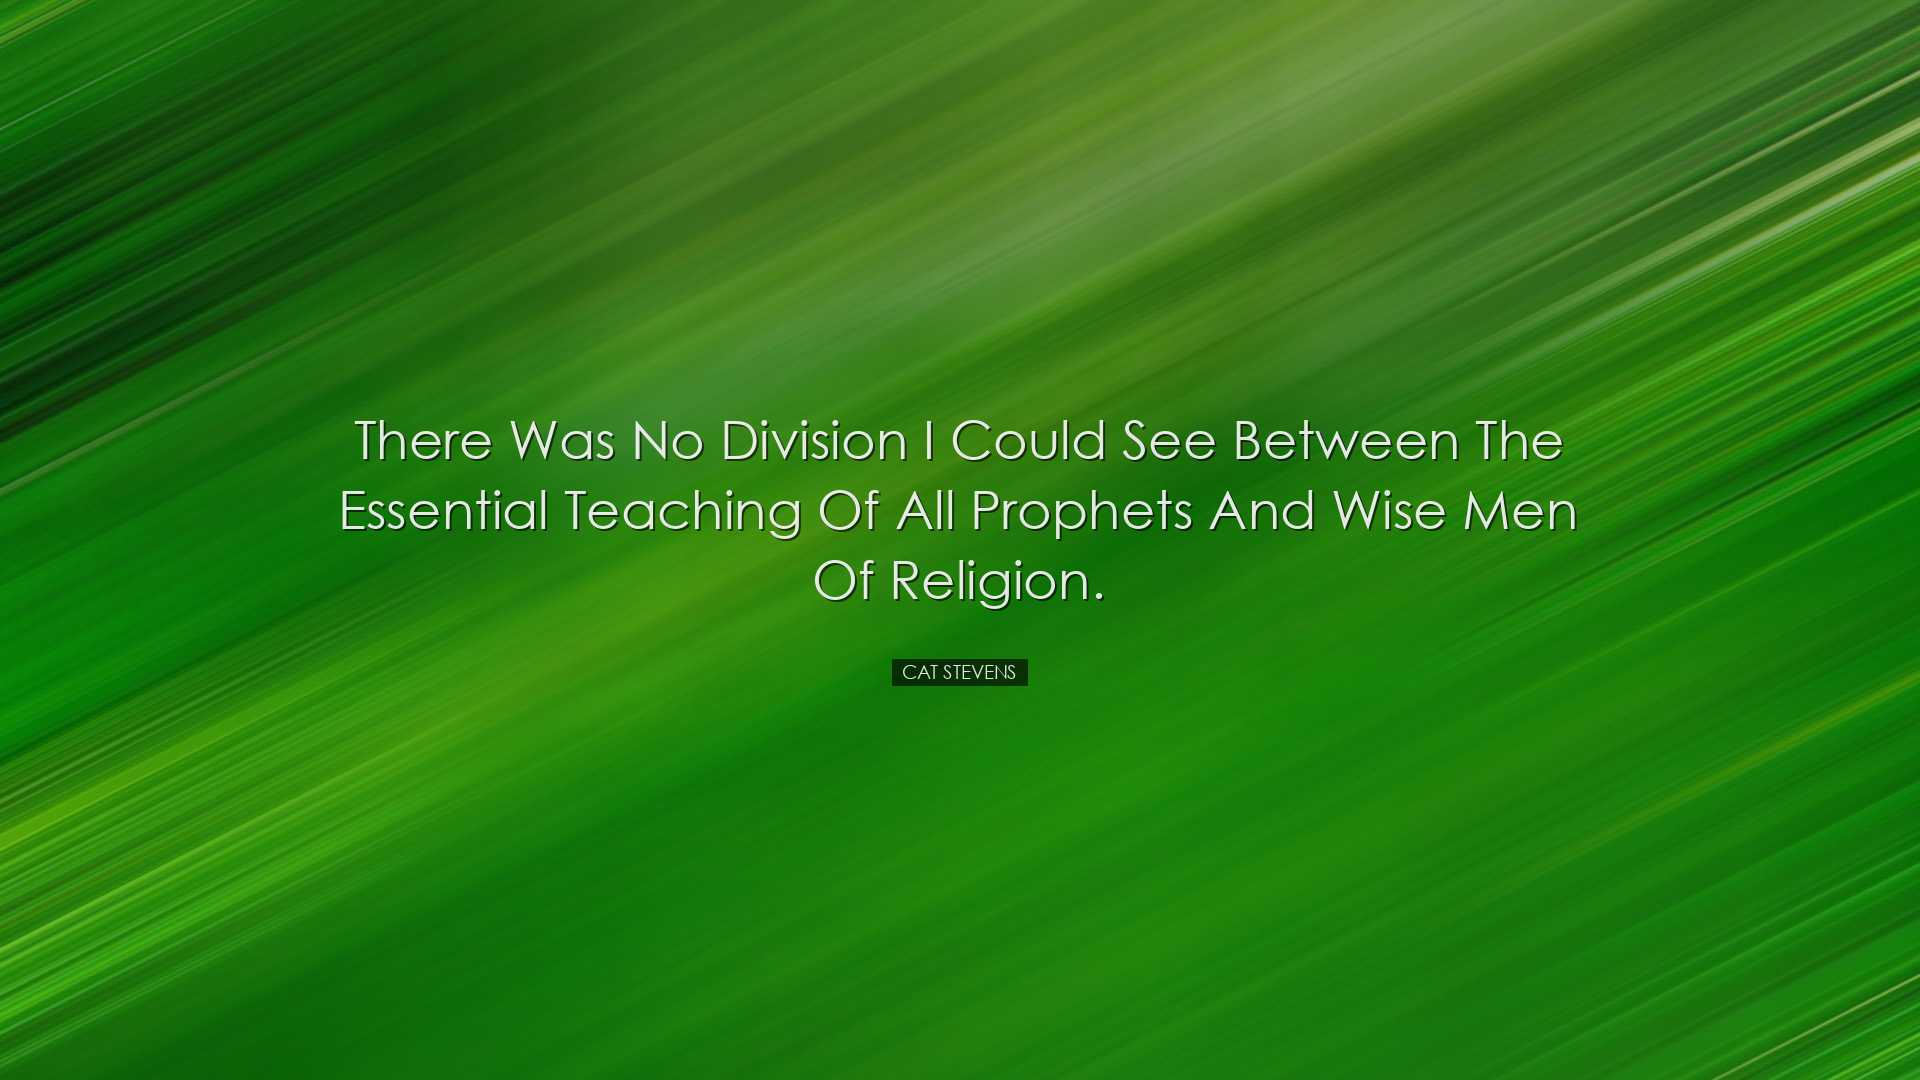 There was no division I could see between the essential teaching o